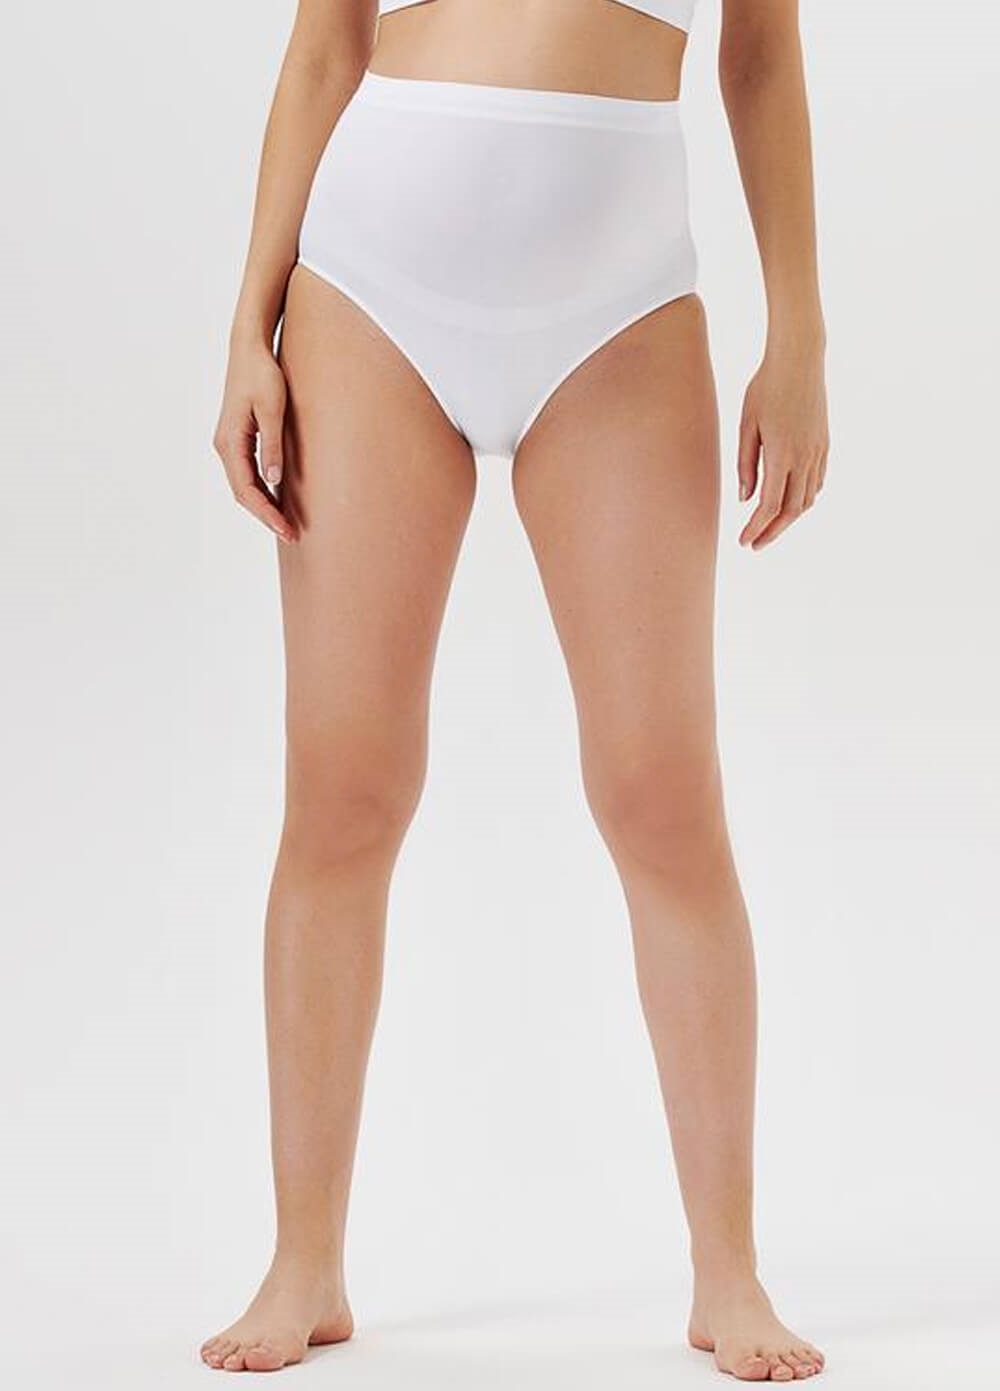 Seamless Over Belly Maternity Briefs in White by Noppies